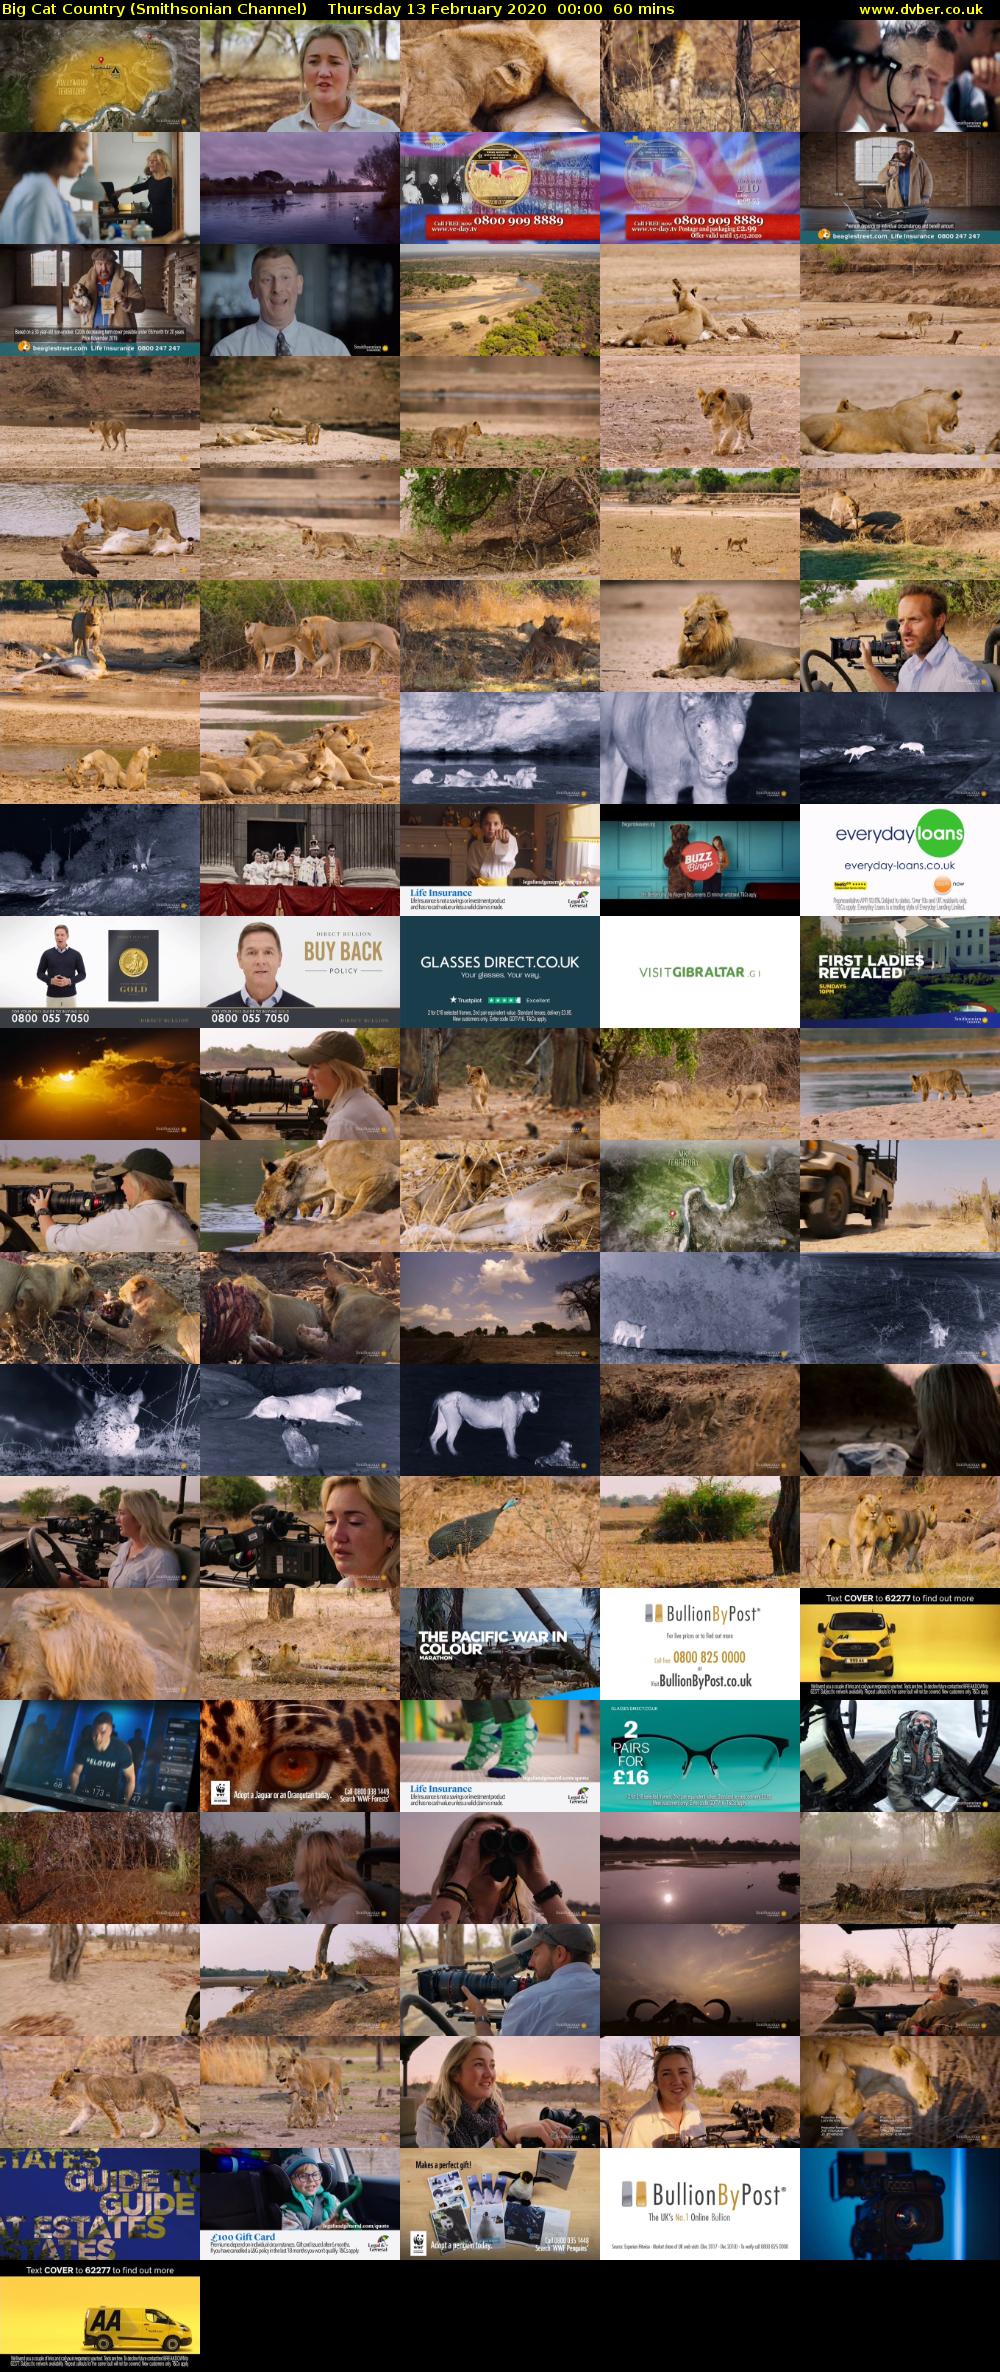 Big Cat Country (Smithsonian Channel) Thursday 13 February 2020 00:00 - 01:00